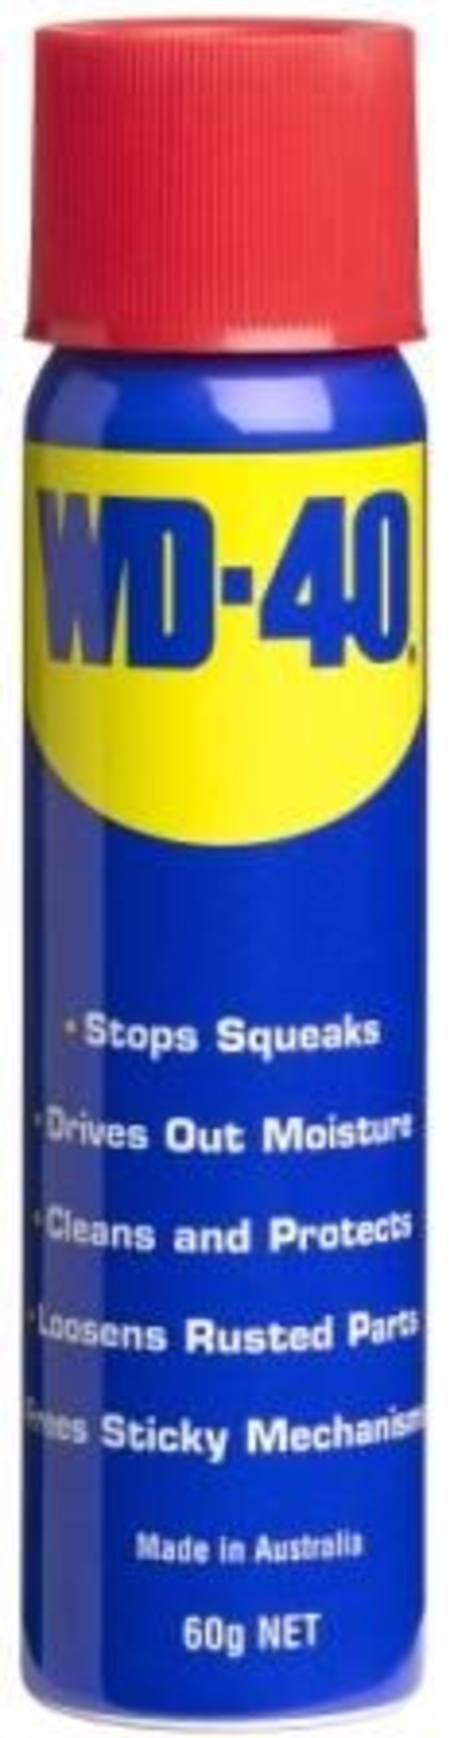 Buy WD-40 LUBRICANT AND PENENTRANT 425g in NZ. 